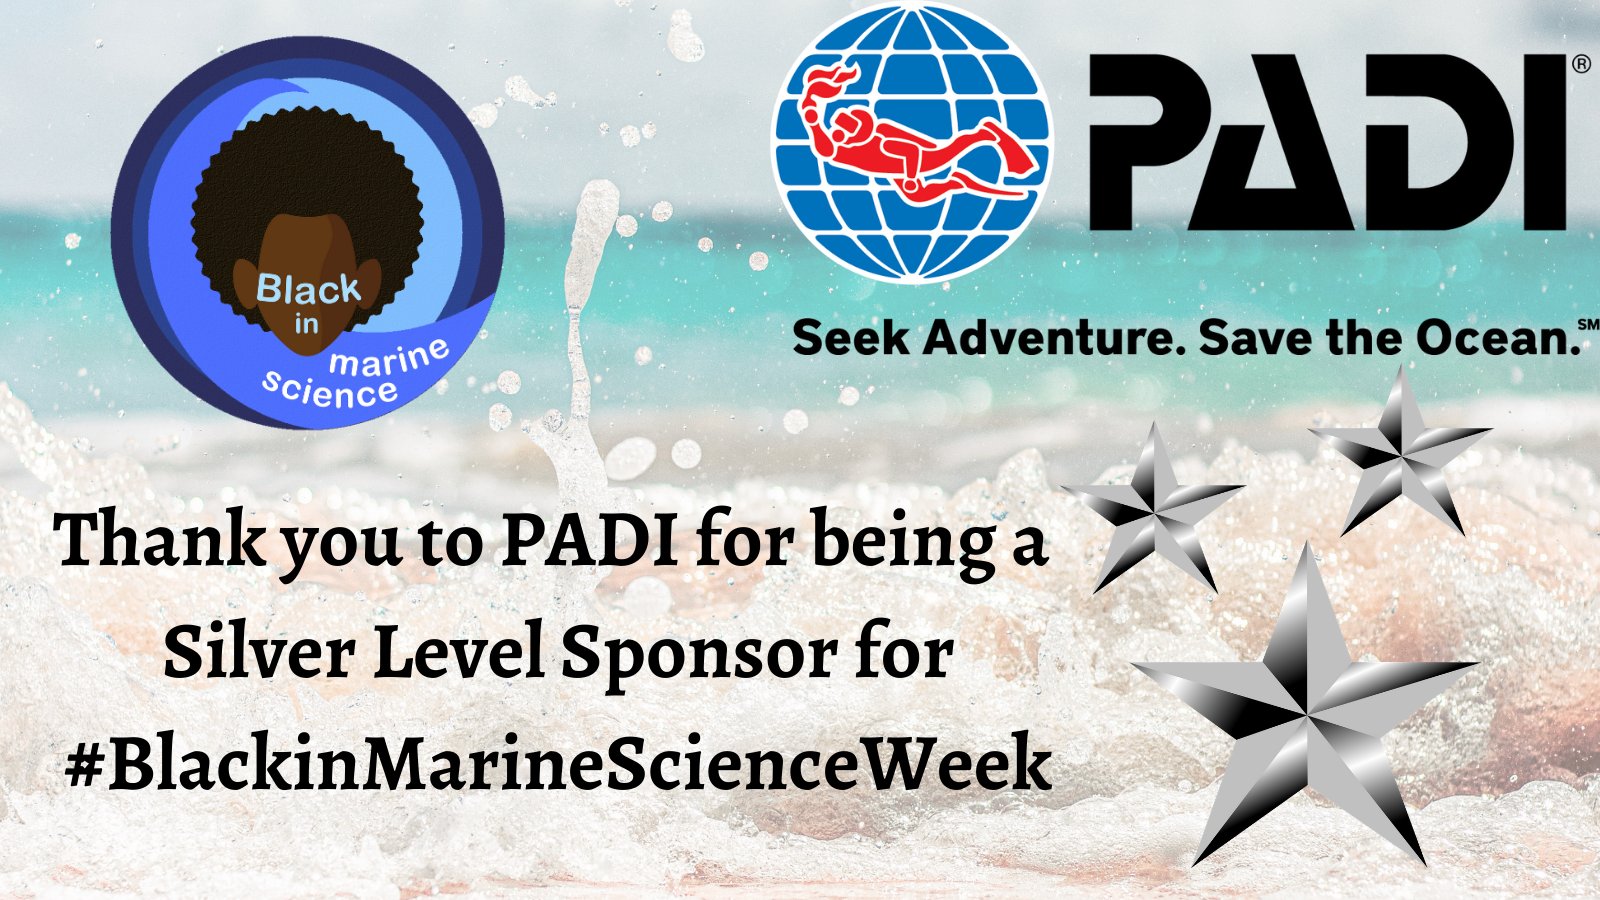 Thank you to PADI for being a Silver Level Sponsor for Black in Marine Science Week